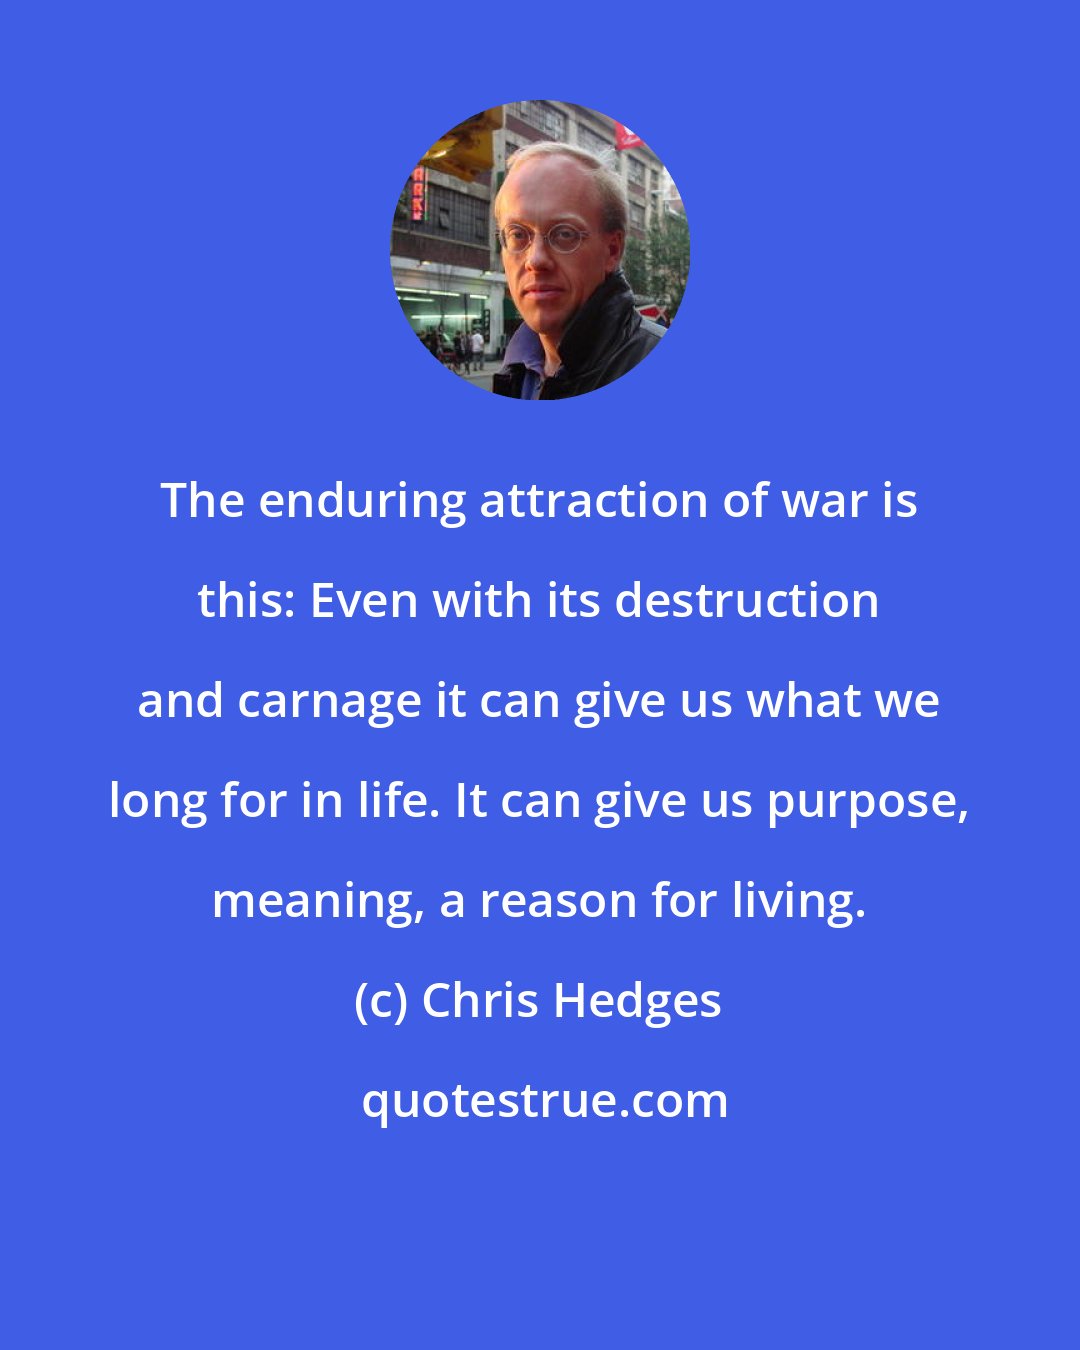 Chris Hedges: The enduring attraction of war is this: Even with its destruction and carnage it can give us what we long for in life. It can give us purpose, meaning, a reason for living.